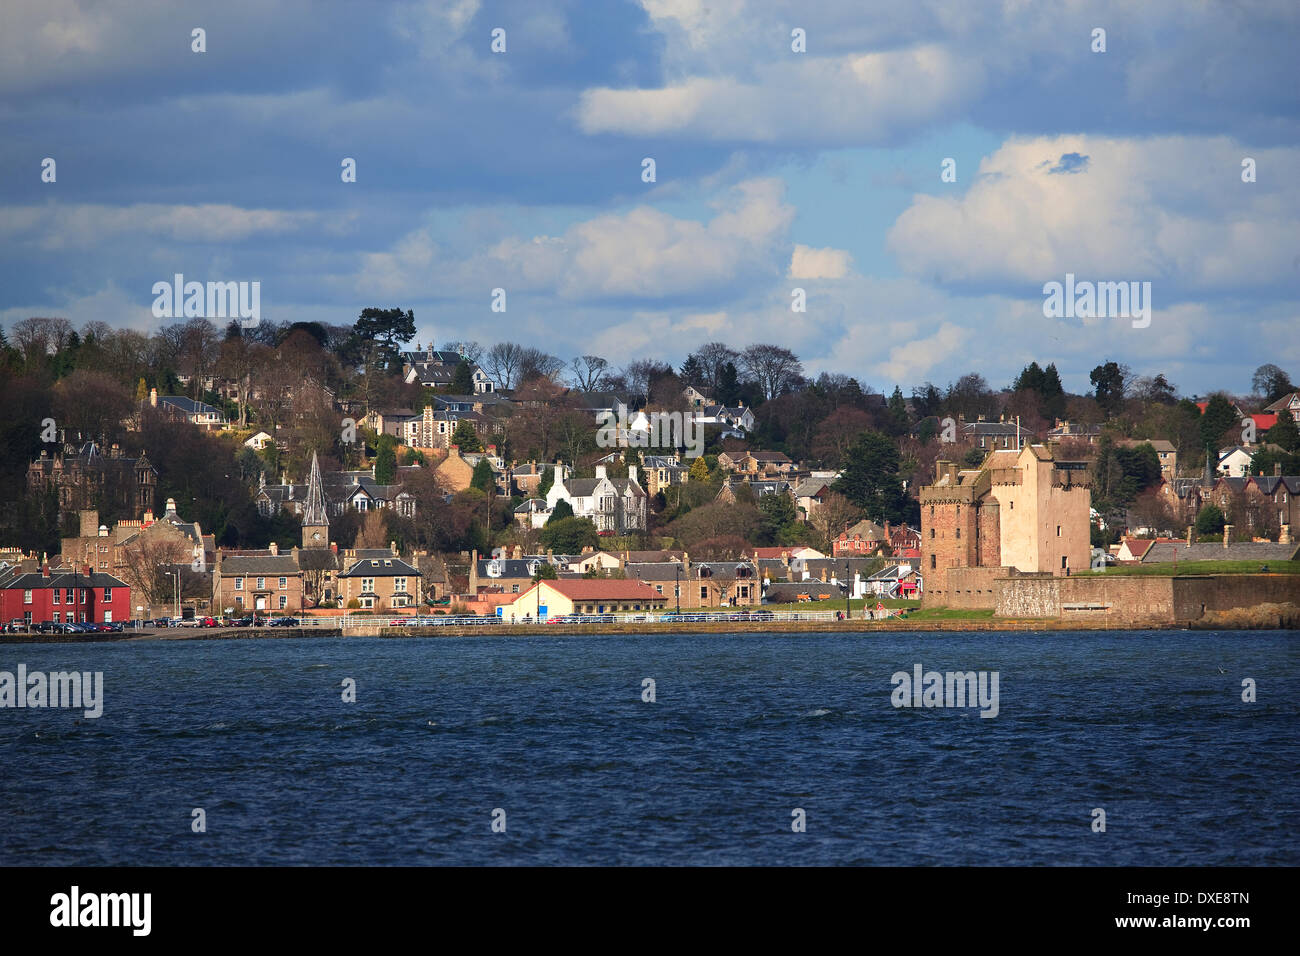 Broughty ferry and castle, Tayside Stock Photo